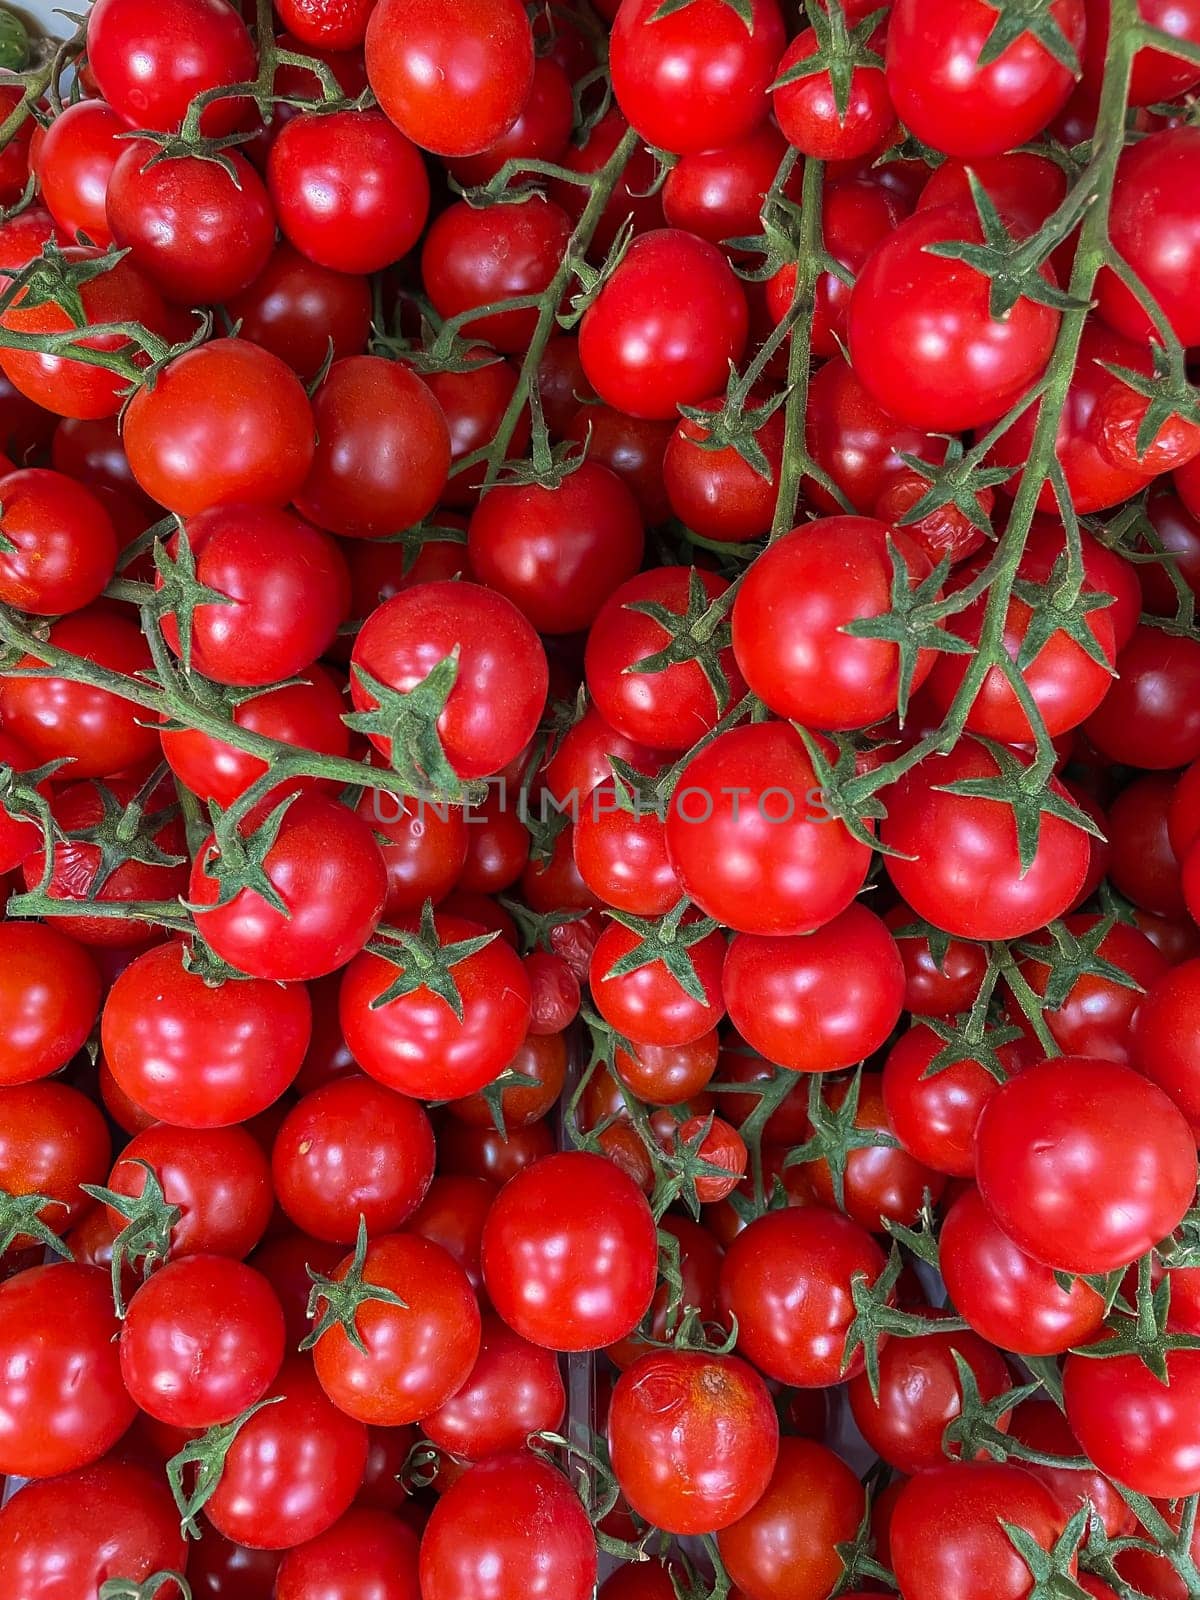 lots of ripe red tomato vitamins healthy nutrition fruits as background